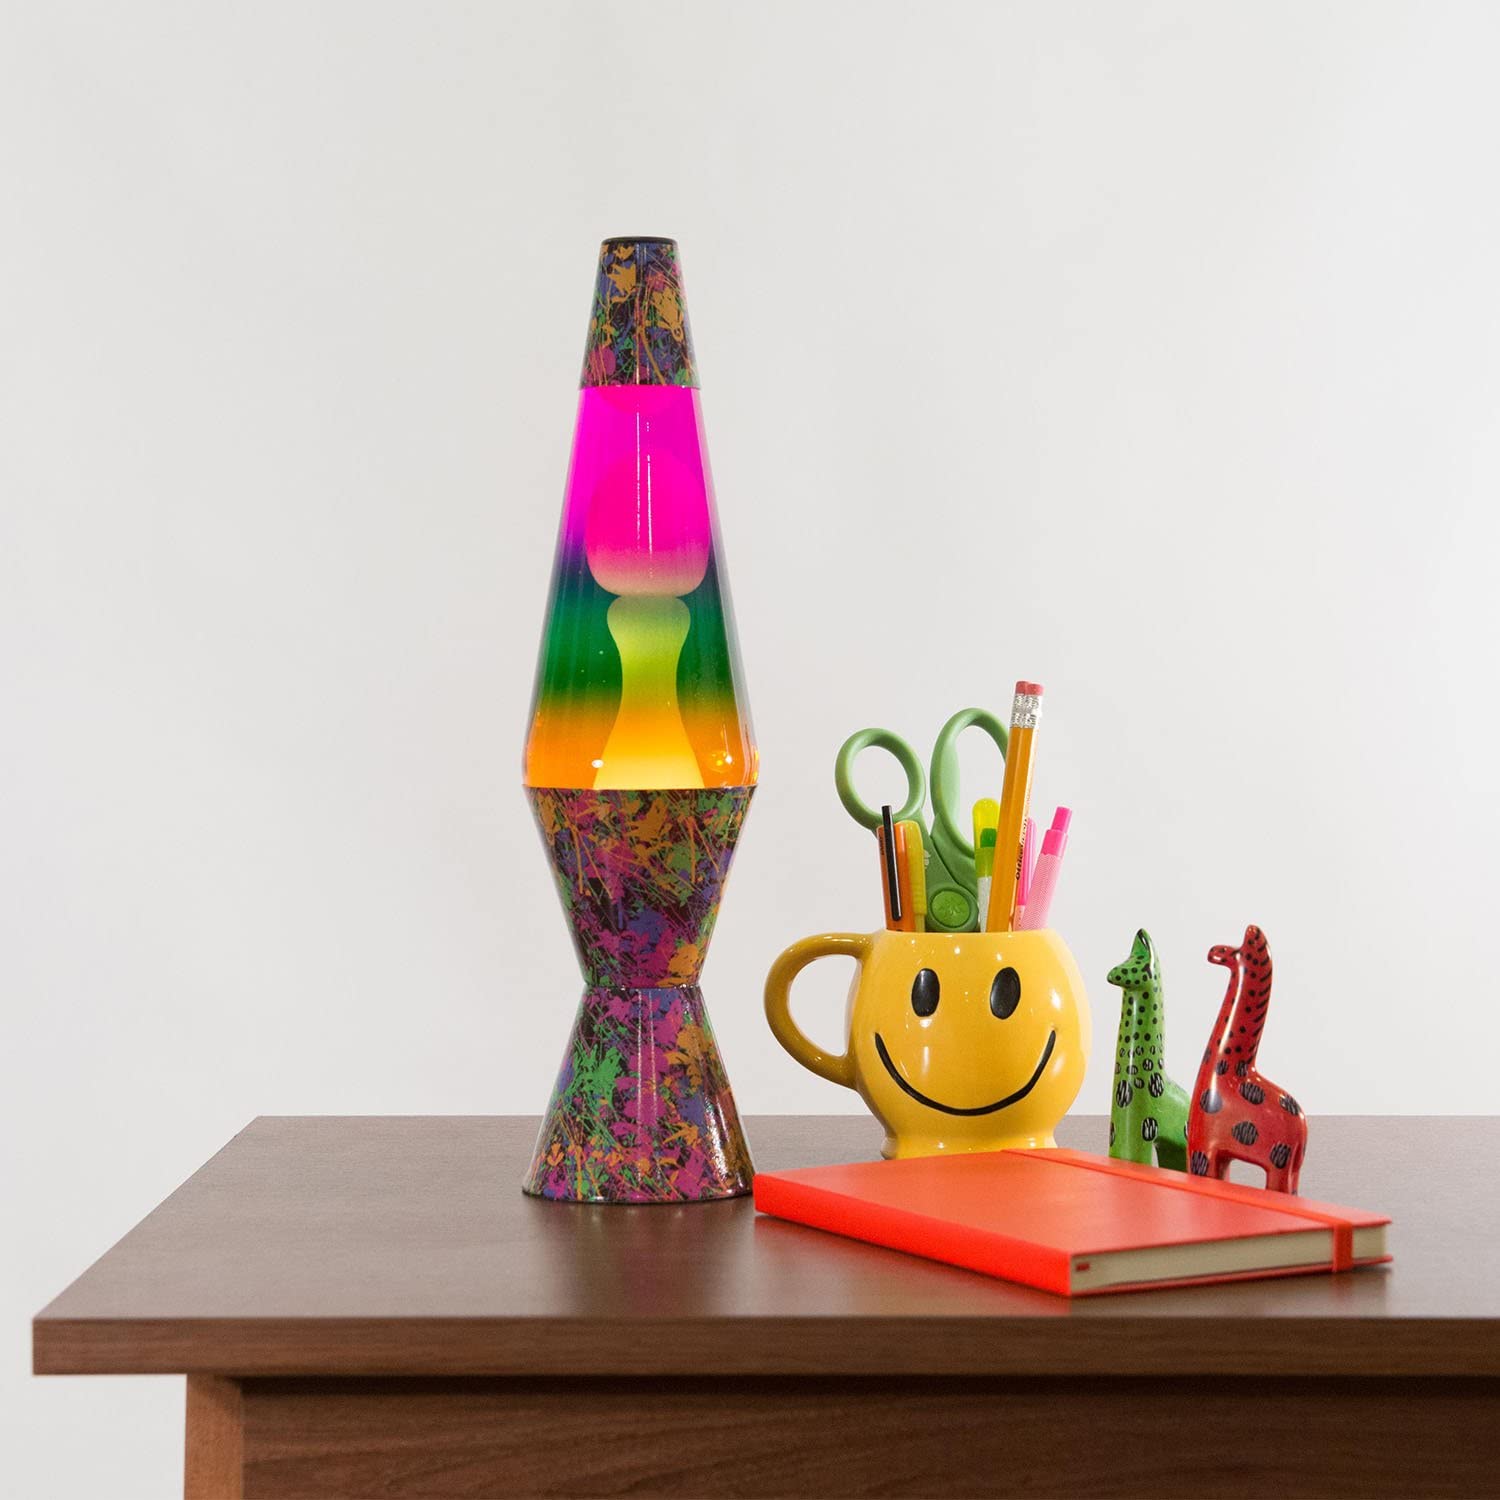 Retro Paint Splatter 10 Unique Lava Lamps Ideas and Complete Guide Before Buying - 7